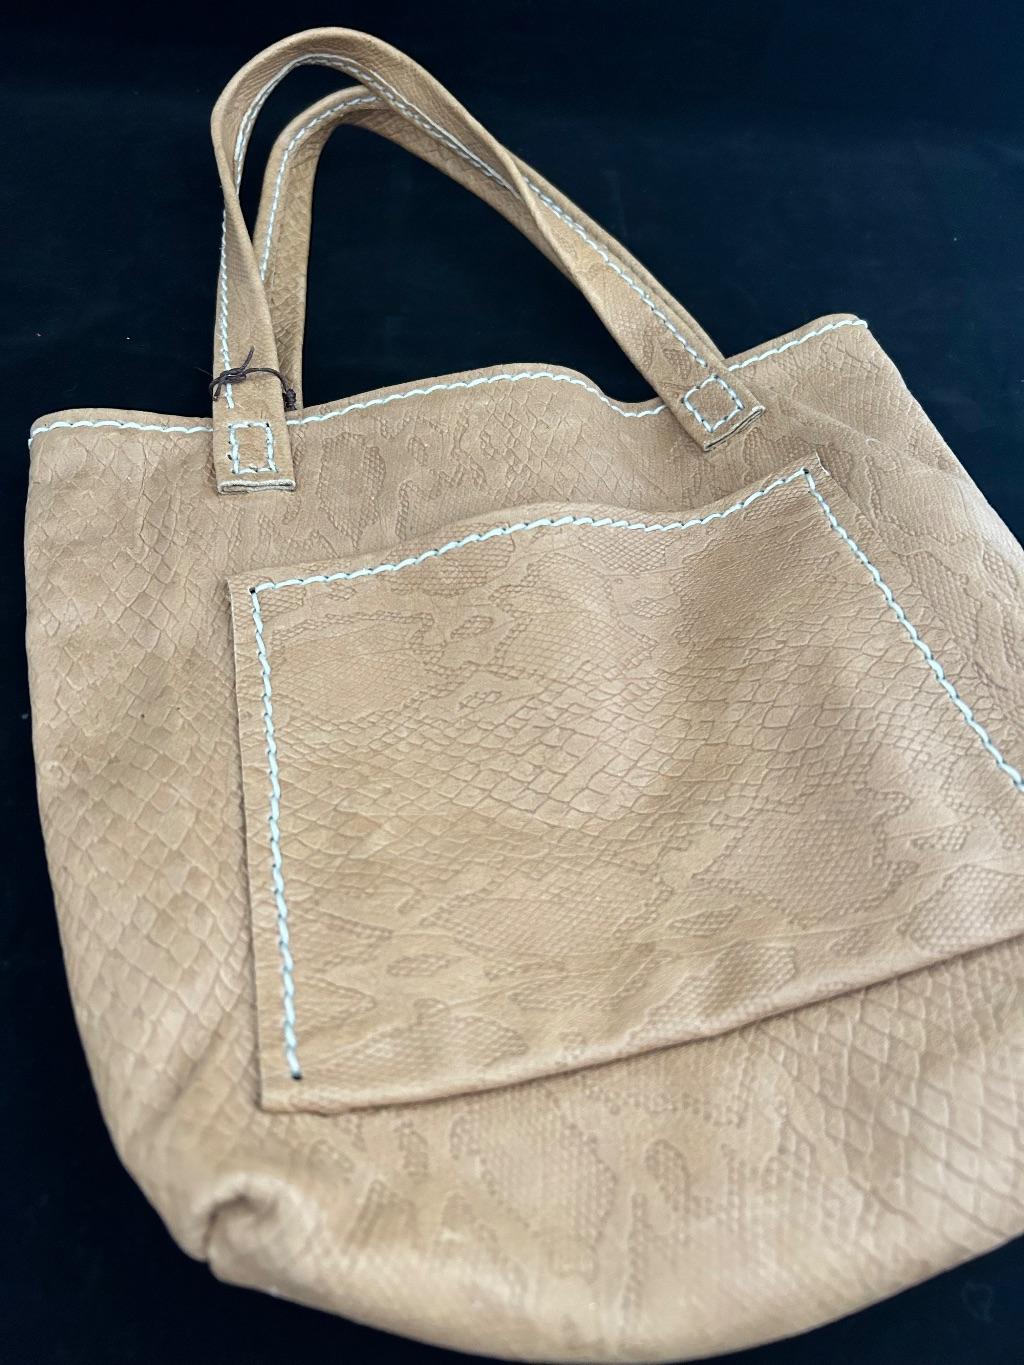 Hand-stitched Leather Bag